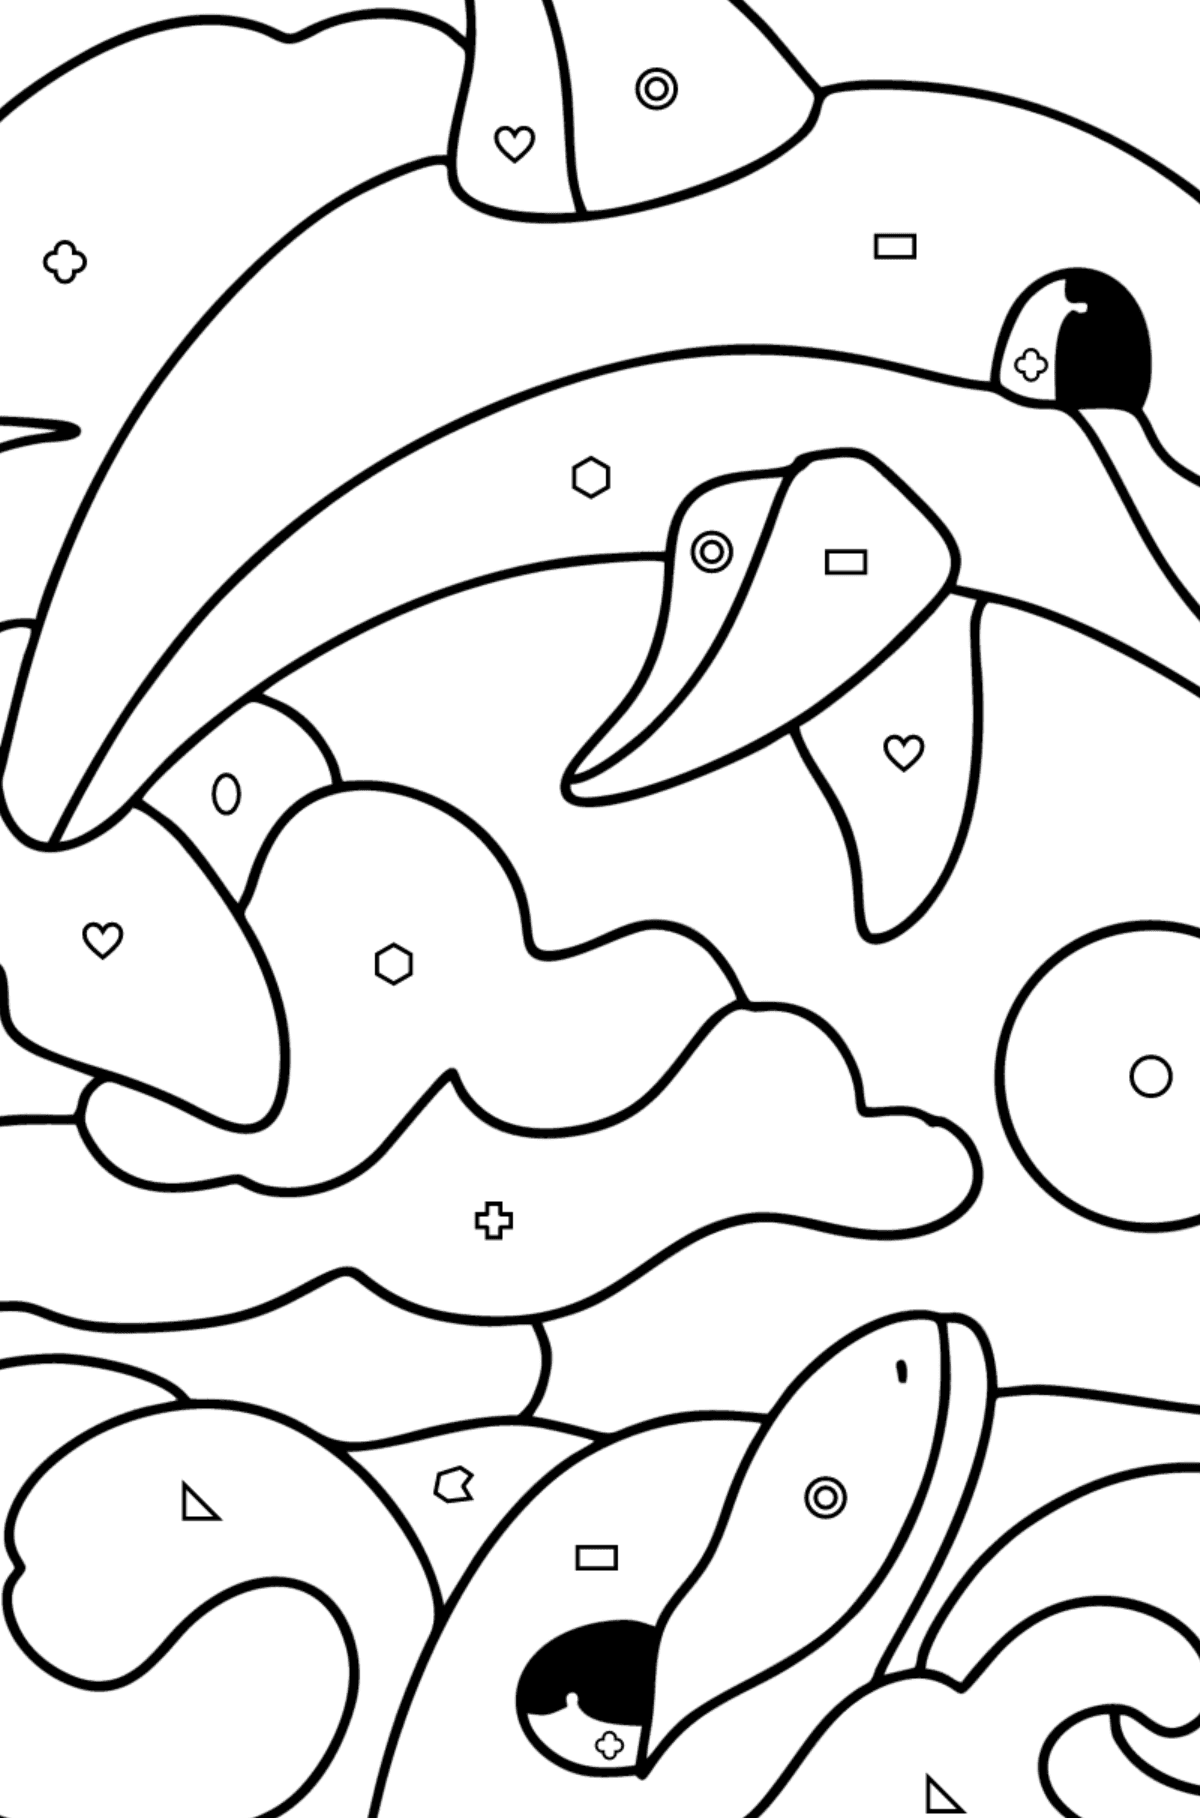 Dolphins coloring page - Coloring by Geometric Shapes for Kids